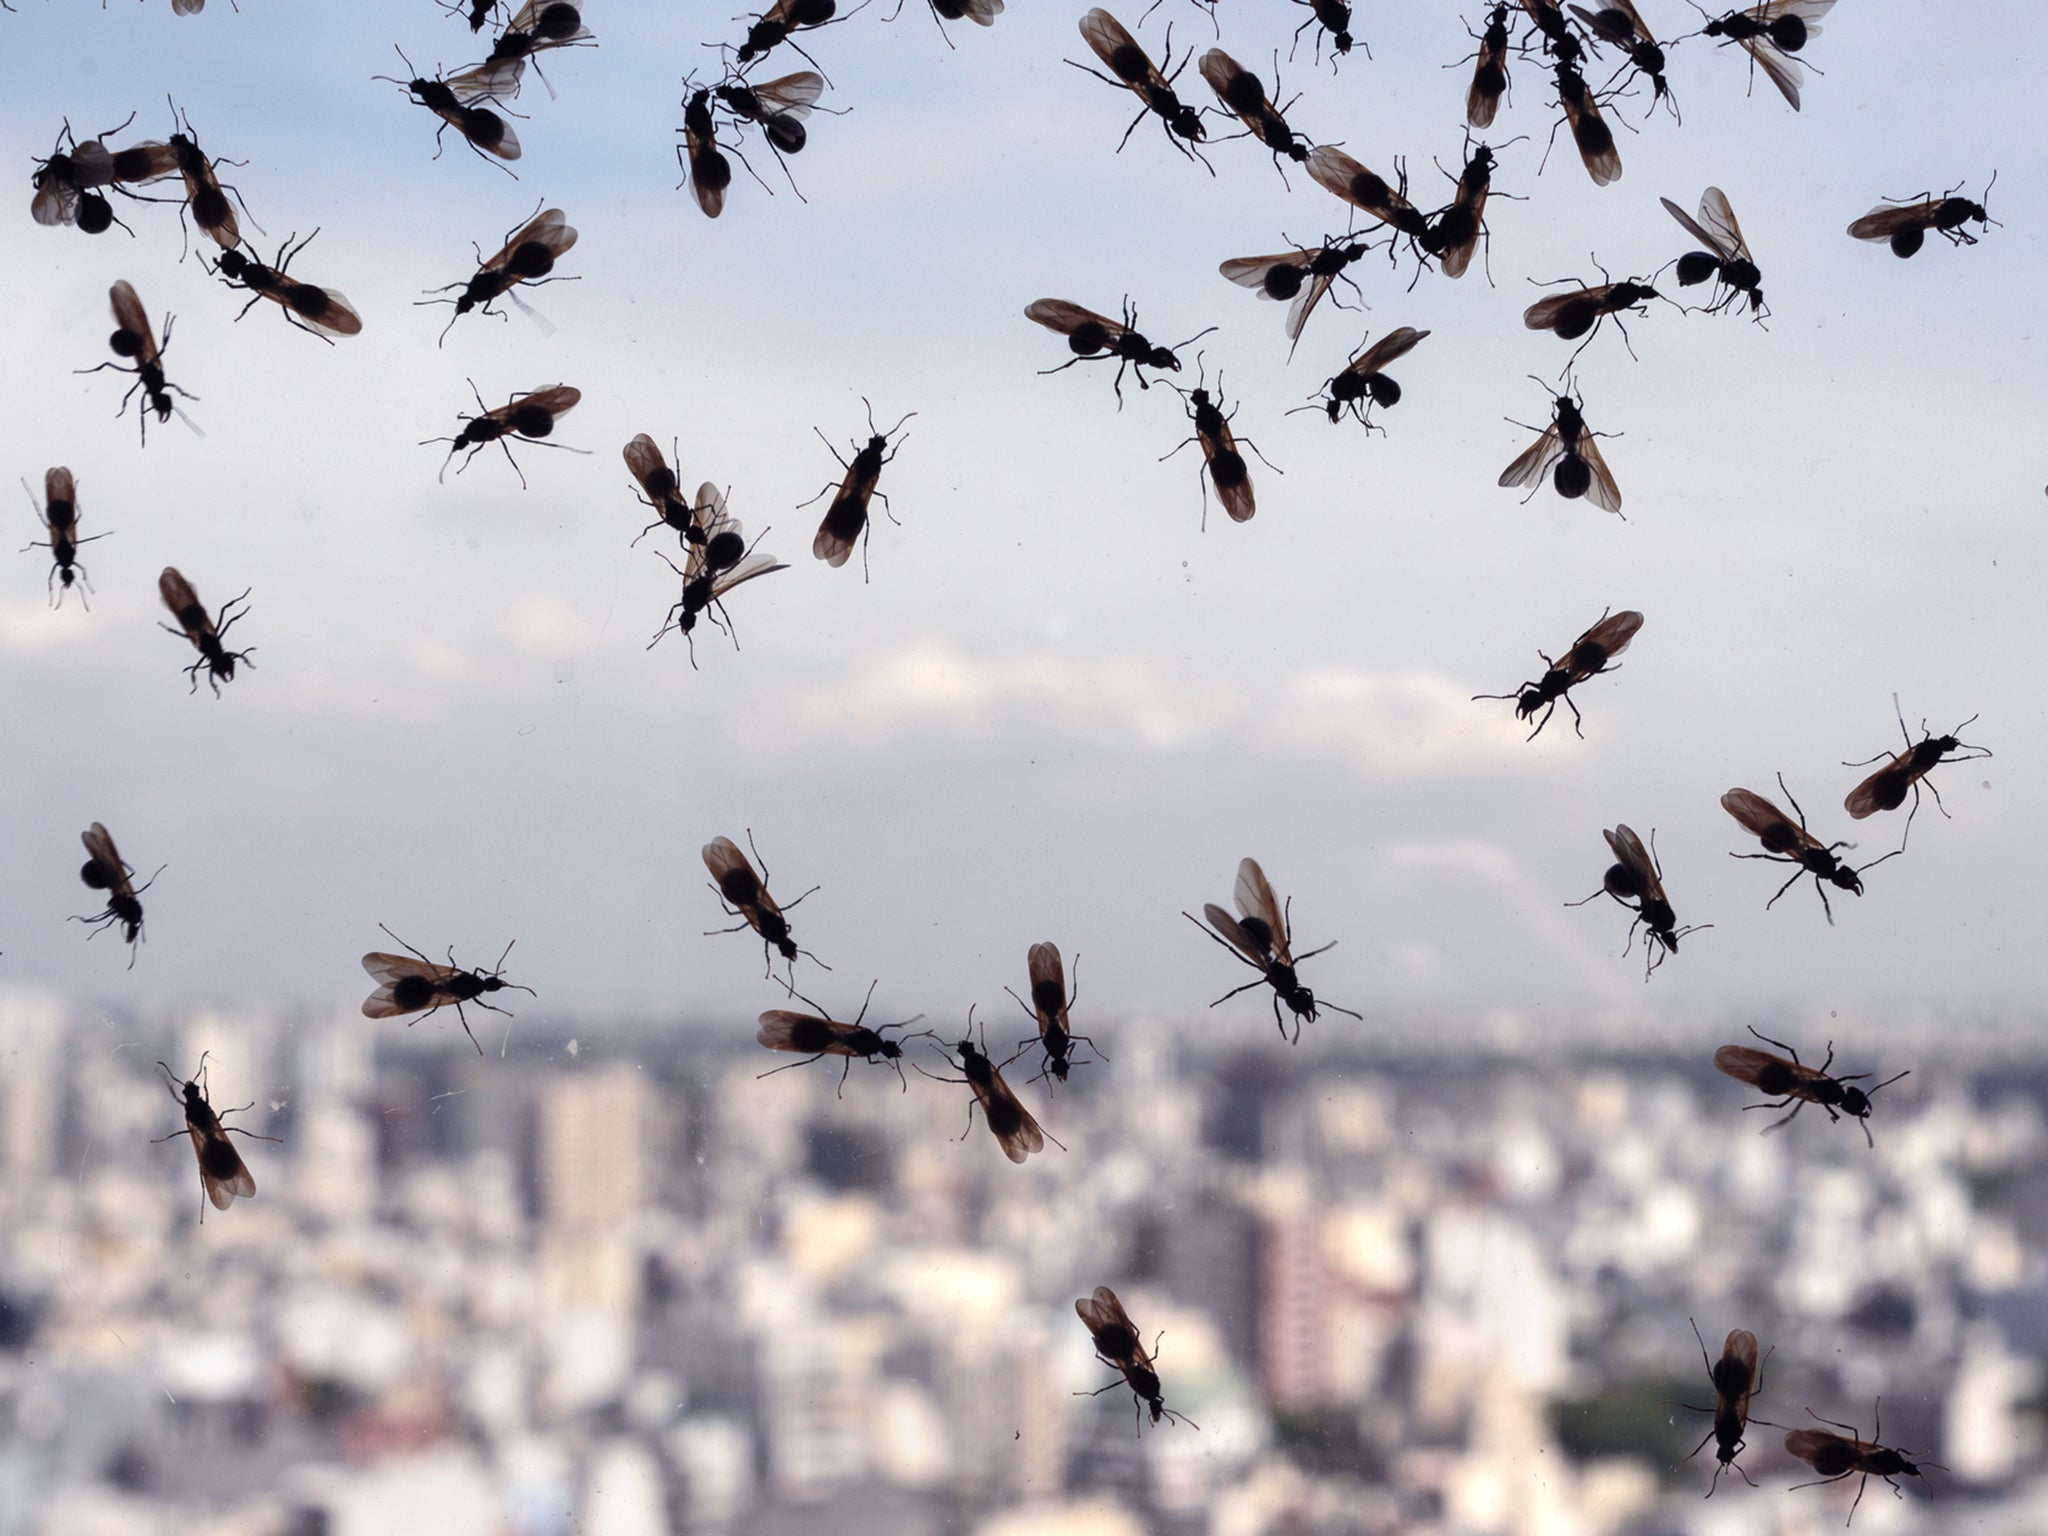 Flying ants could swarm to Wembley for Euro 2020 final